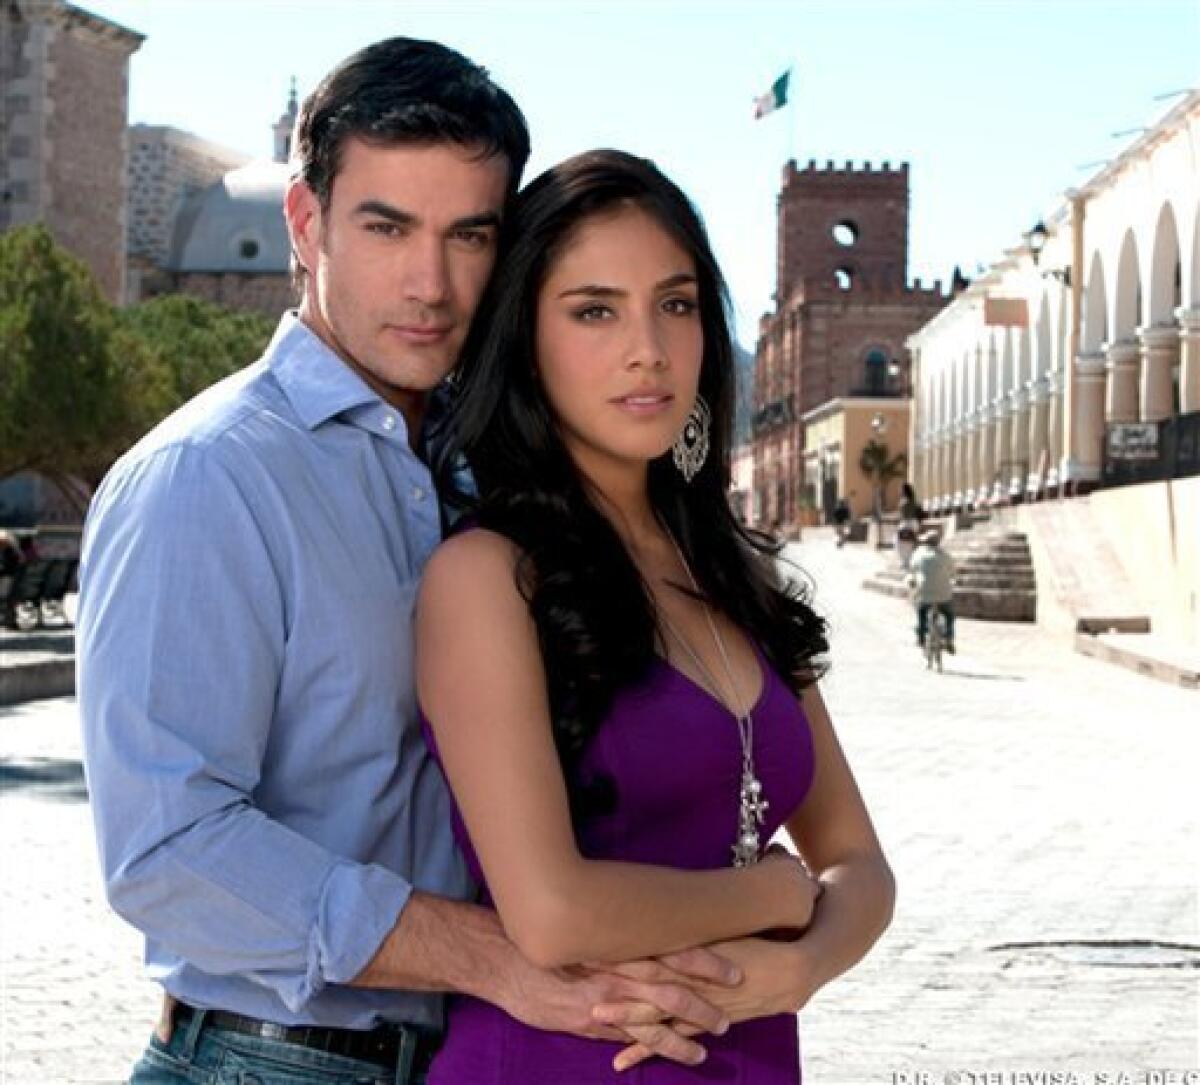 This undated image provided by Univision shows a scene from the telenovela, “La Fuerza del Destino,” The Power of Destiny. Univision, the nation's No. 1 Spanish-language broadcaster, is bringing its popular telenovelas and other prime-time TV programming to online video service Hulu.(AP Photo/Univision)